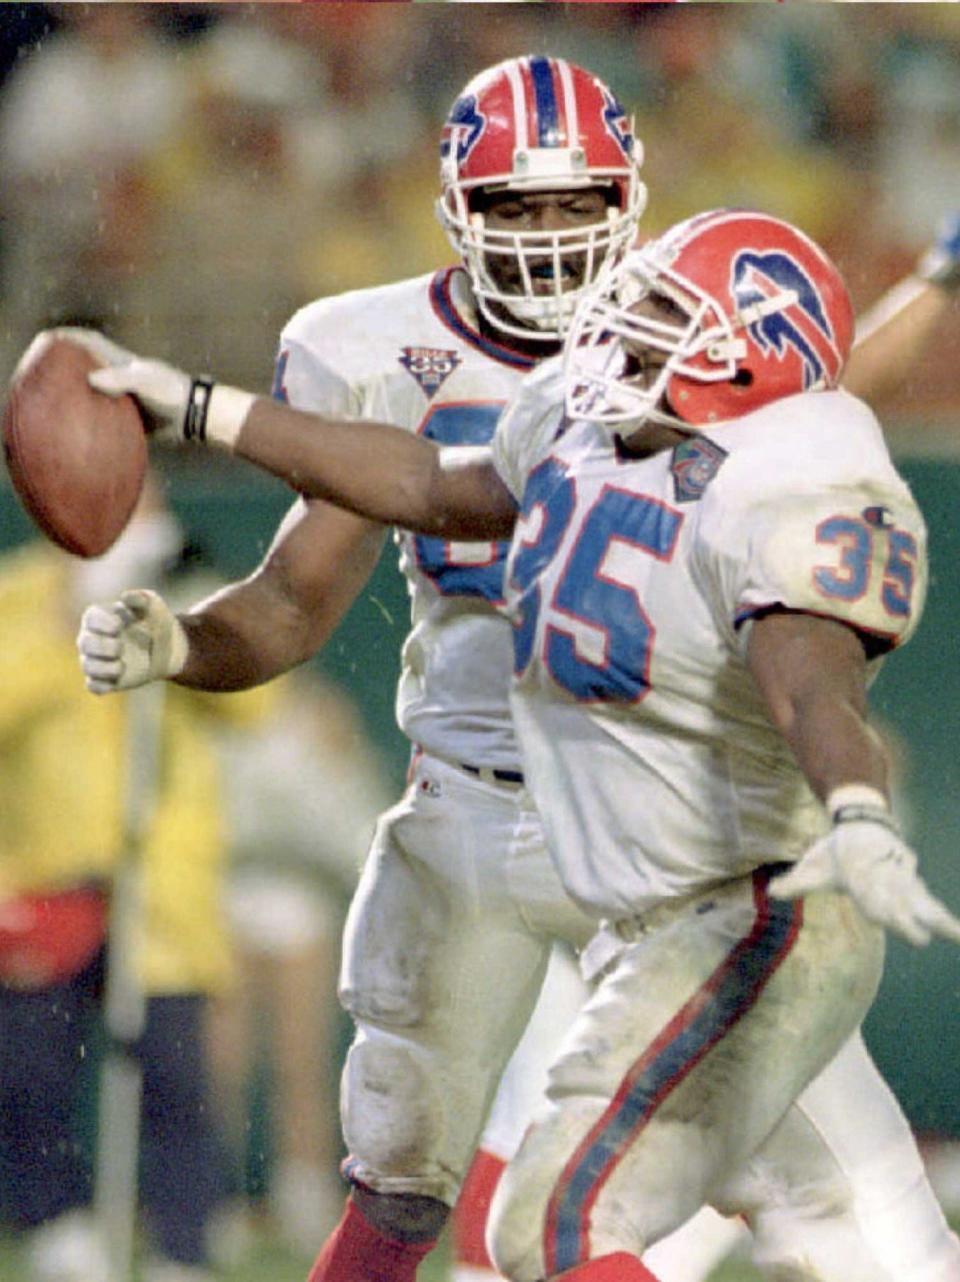 Buffalo Bills running back Cardwell Gardner celebrates his third quarter touchdown with teammate Corbin Lacina against the Miami Dolphins in Miami on Dec. 4, 1994. The Bills defeated the Dolphins, 42-31.